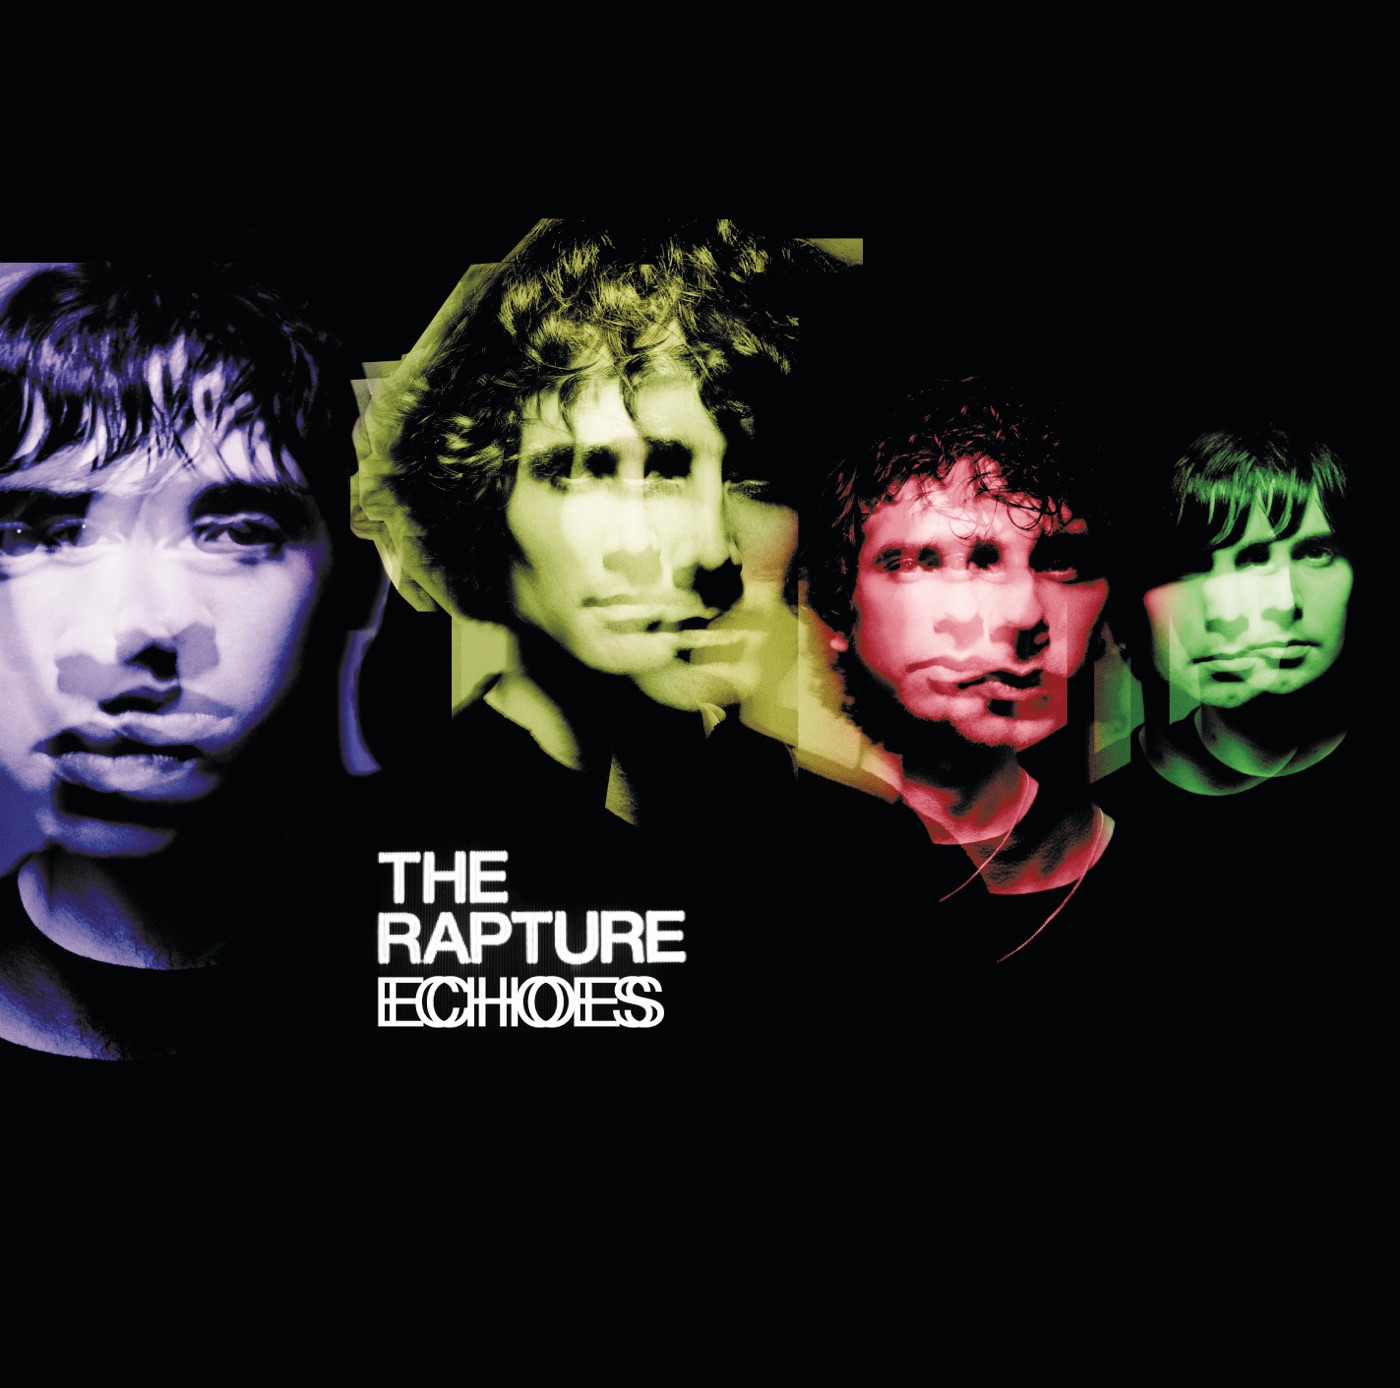 Echoes by The Rapture